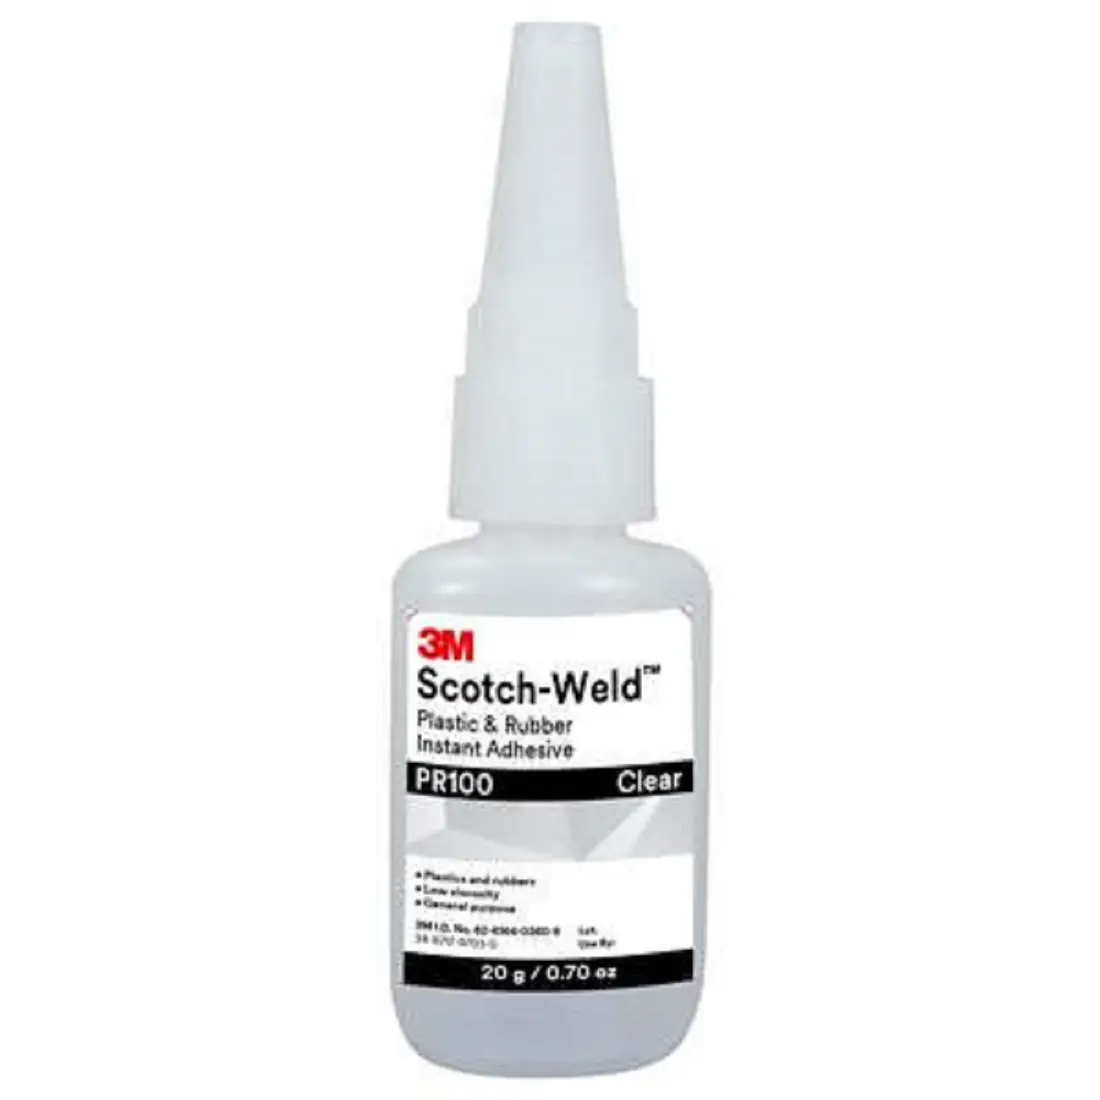 3M Scotch-Weld Plastic & Rubber Instant Adhesive